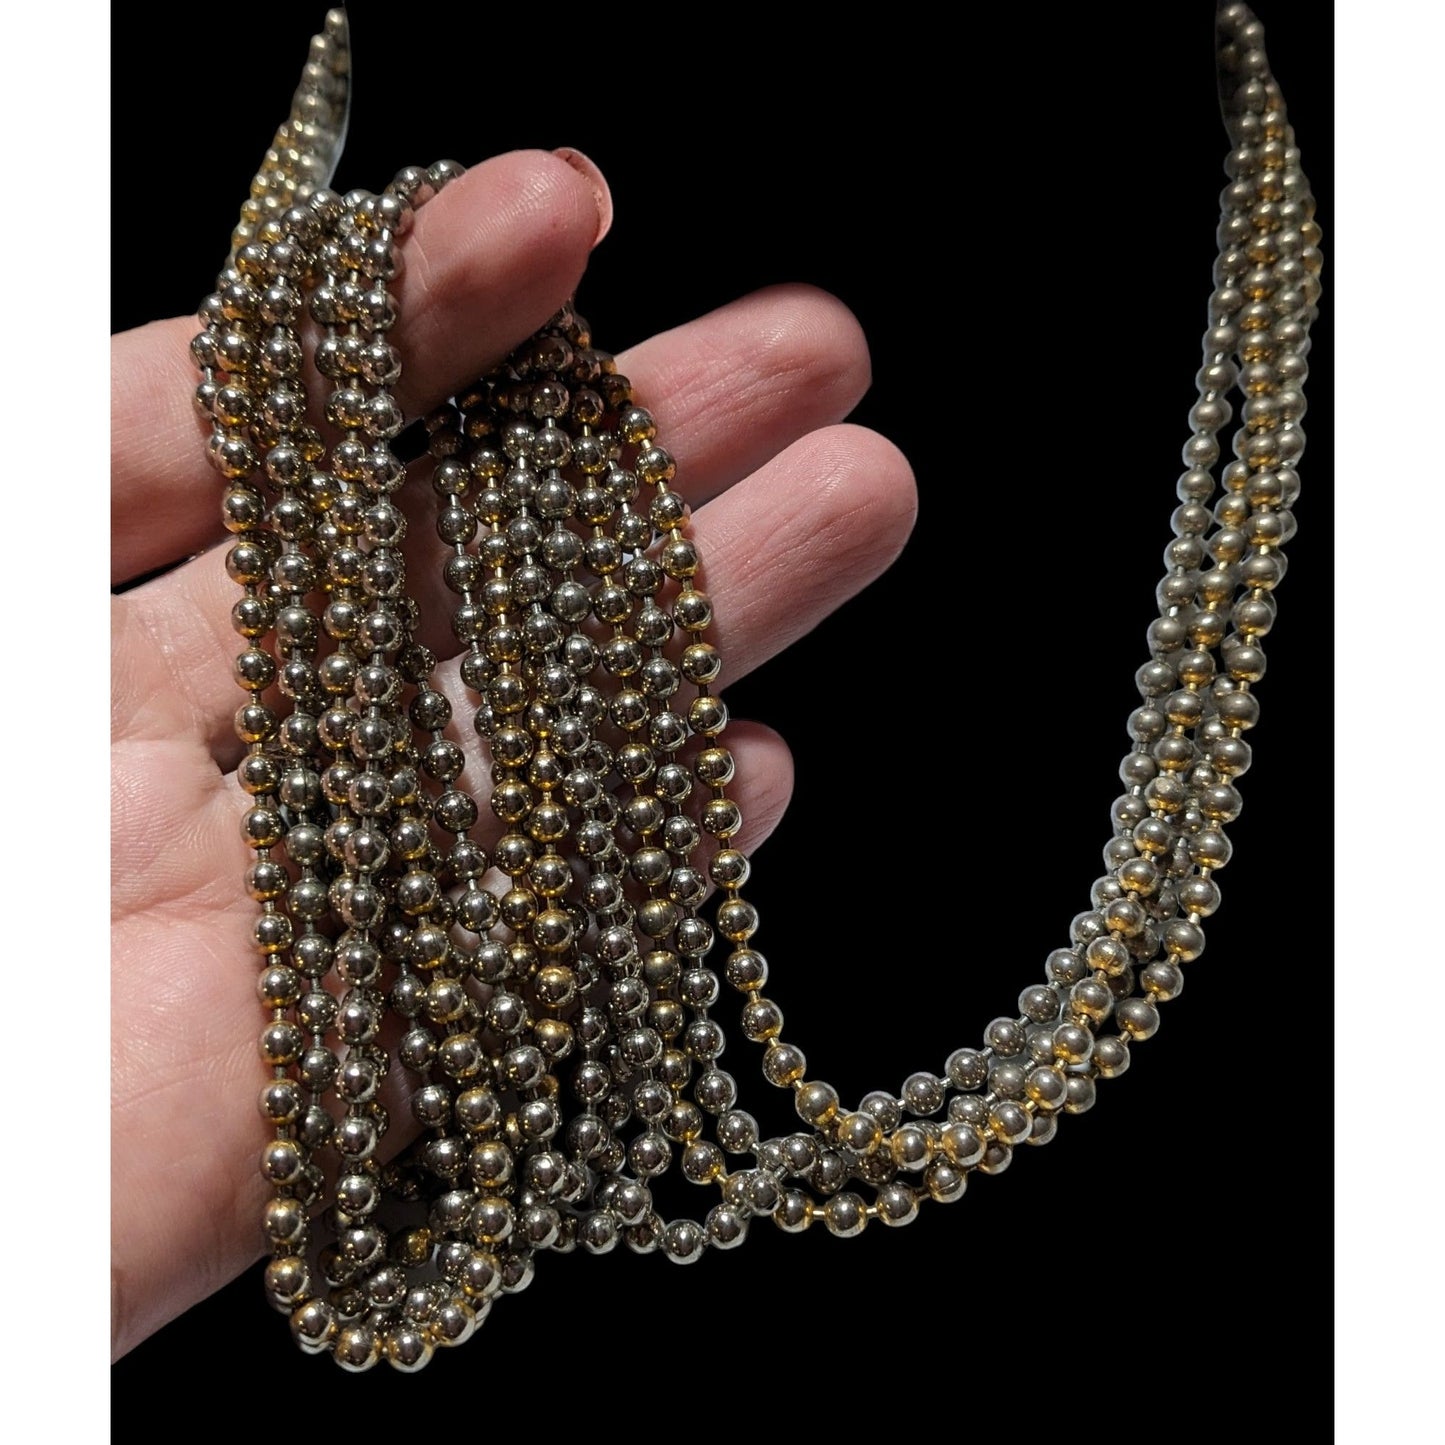 Vintage Multilayer Ball Chain Necklace